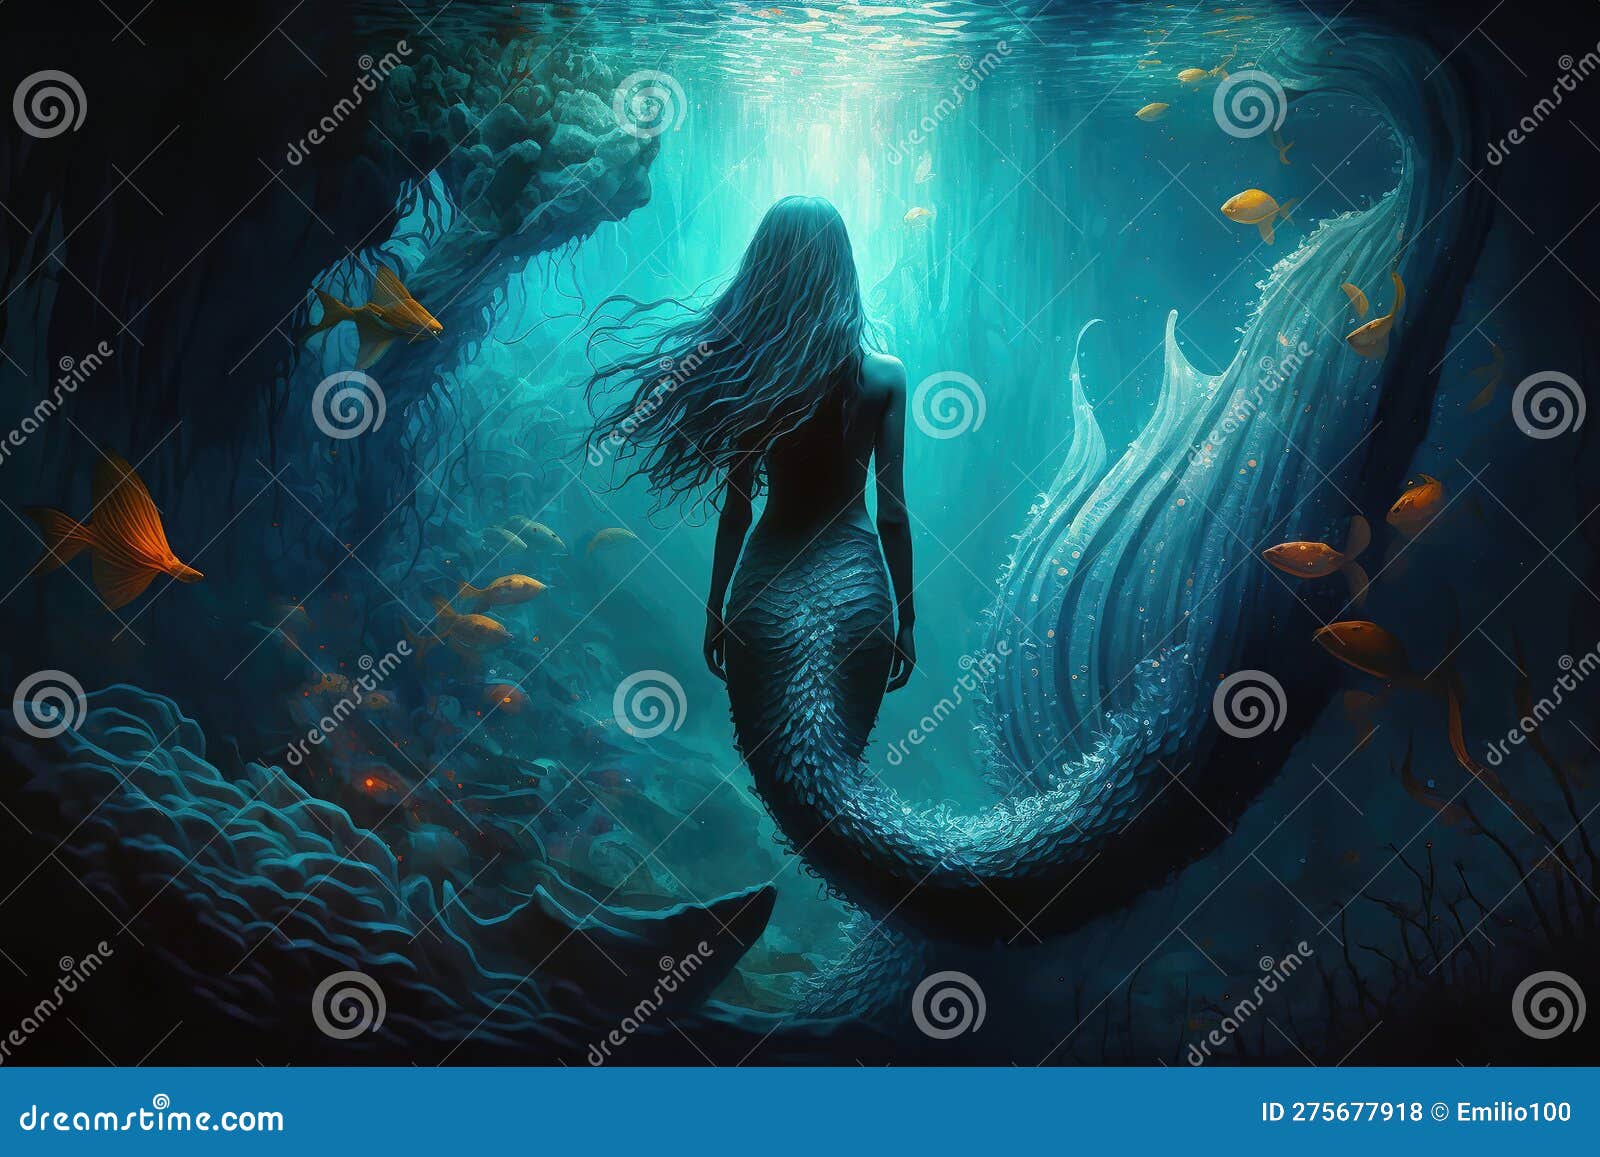 Fish Scales Enchanting Texture Of Scale Fantasy In Blue Mermaid